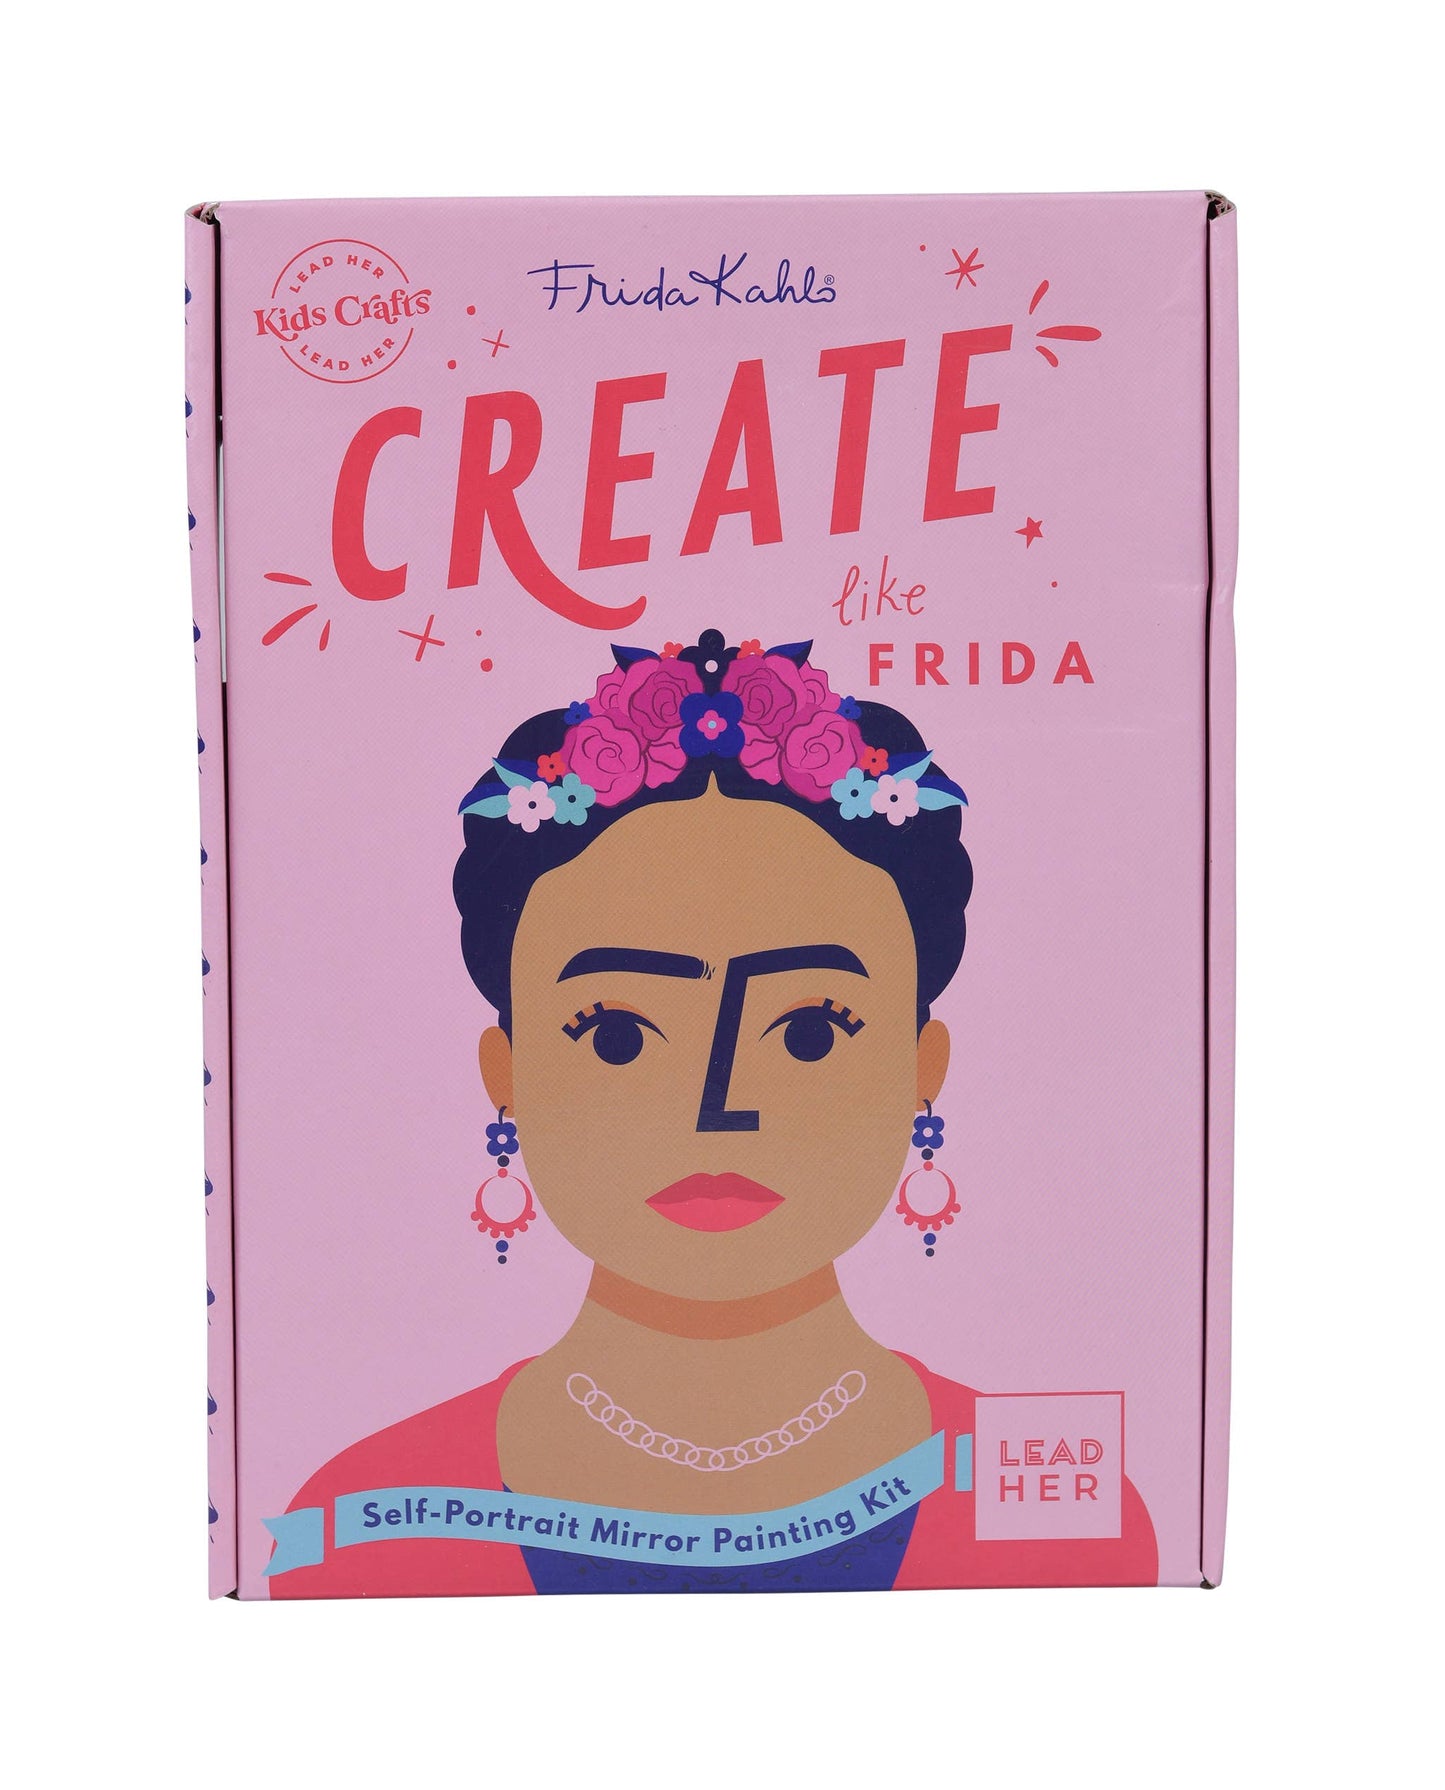 Retail packaging for the “CREATE like Frida” Self-Portrait Mirror Painting Craft Kit.